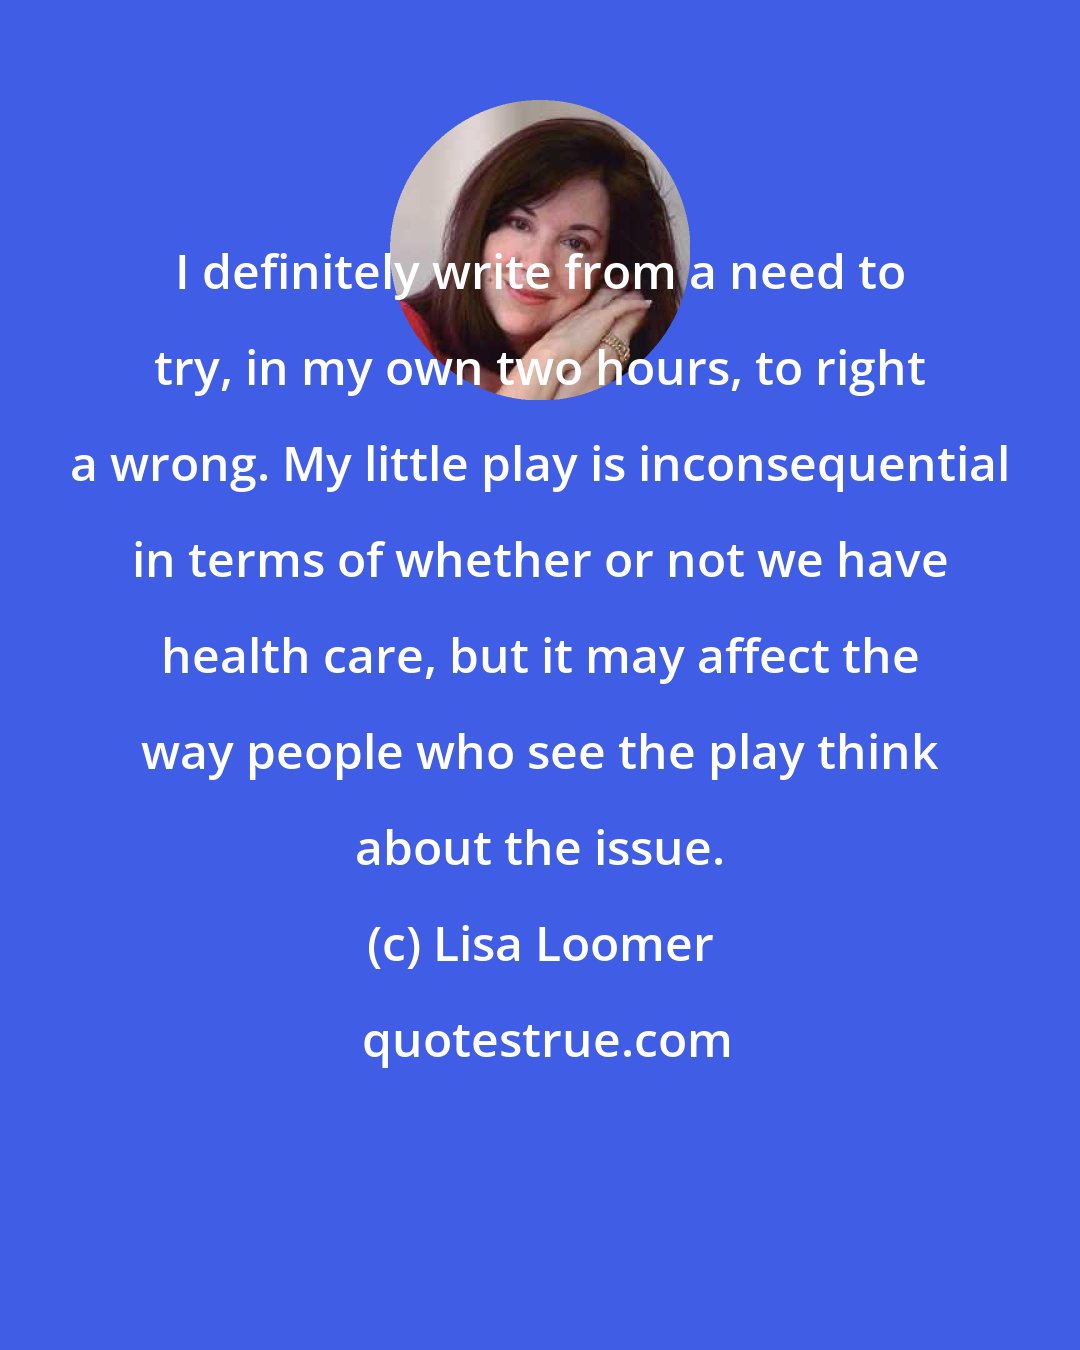 Lisa Loomer: I definitely write from a need to try, in my own two hours, to right a wrong. My little play is inconsequential in terms of whether or not we have health care, but it may affect the way people who see the play think about the issue.